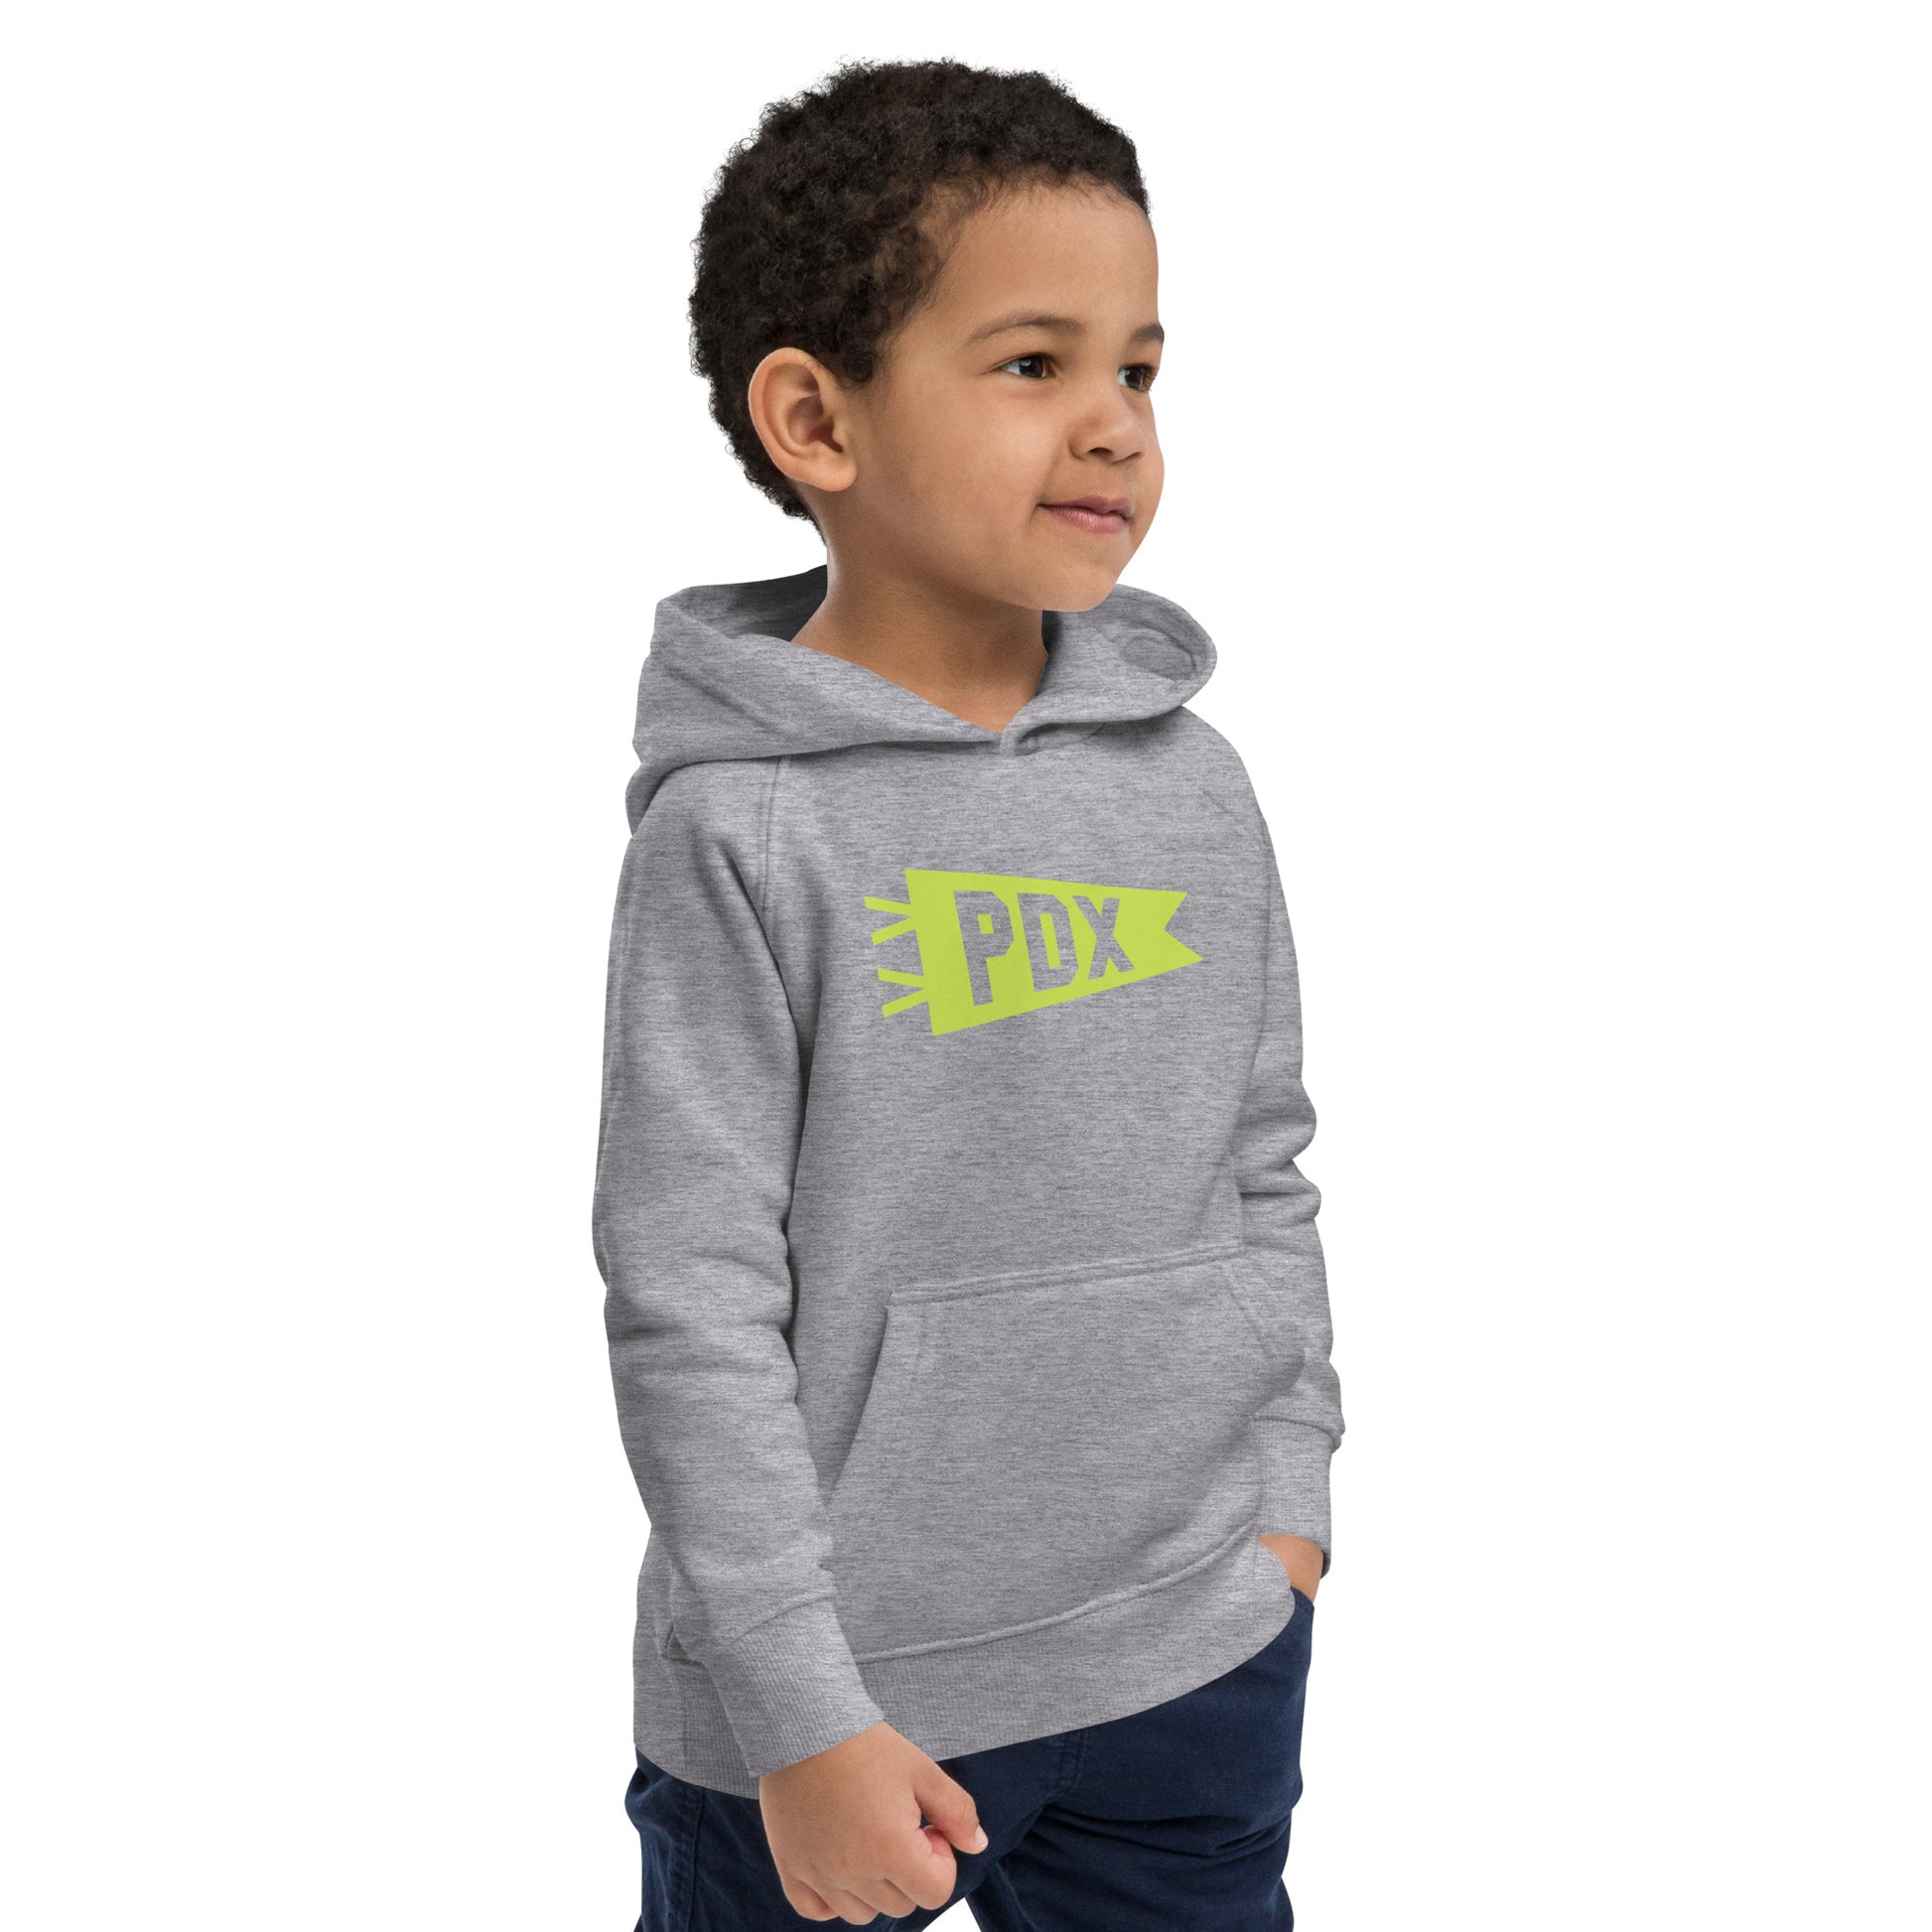 Kid's Sustainable Hoodie - Green Graphic • PDX Portland • YHM Designs - Image 13